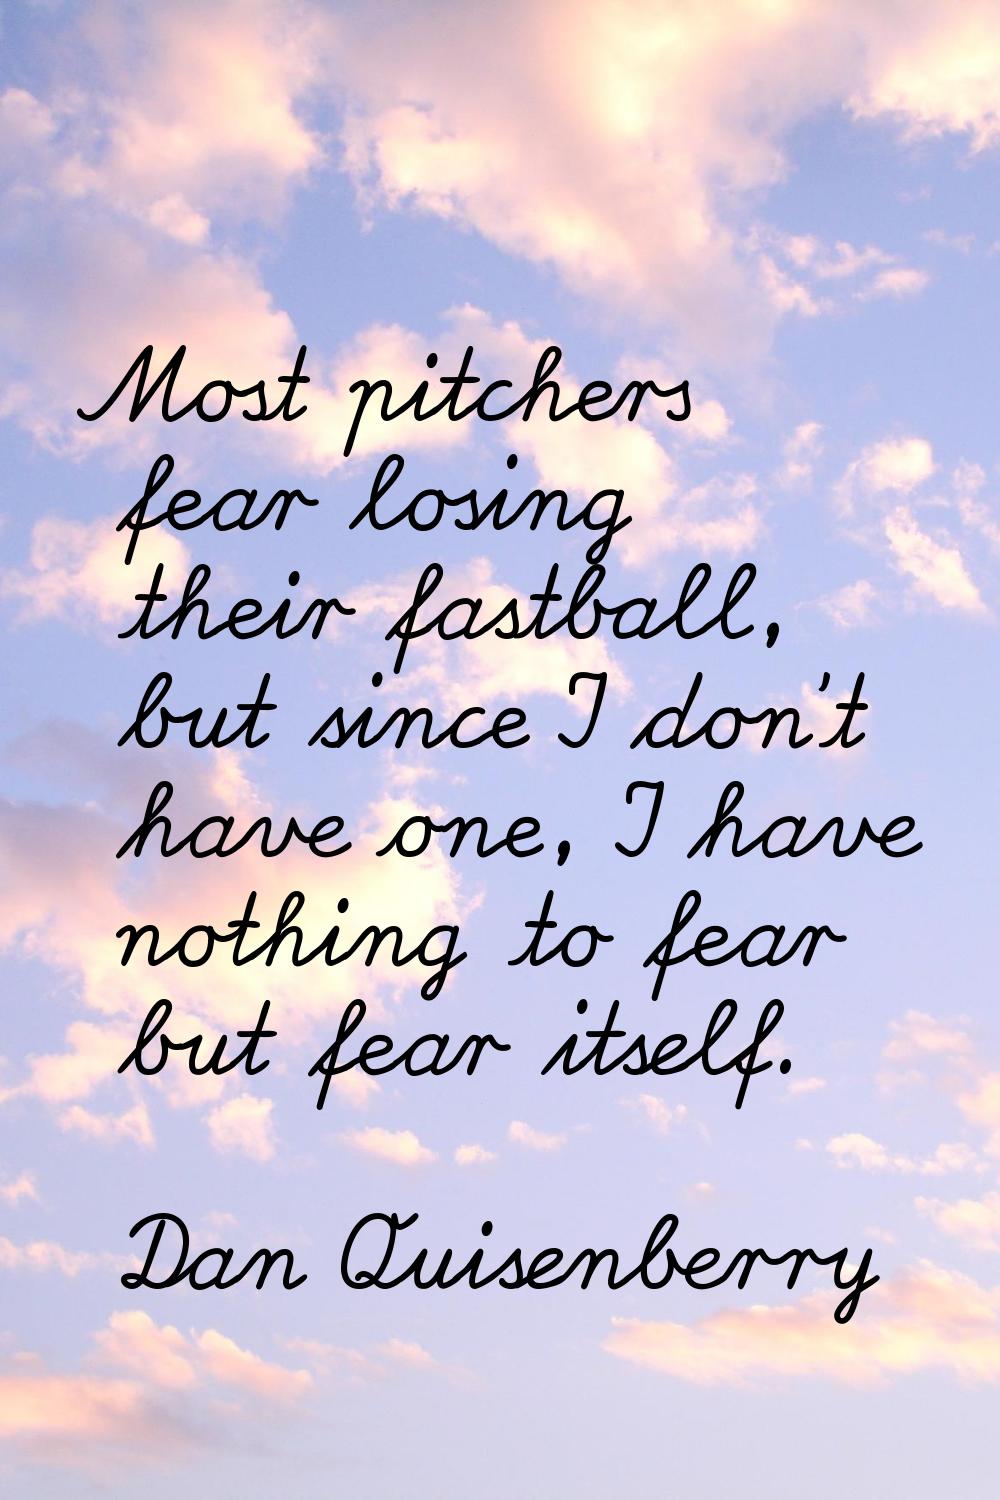 Most pitchers fear losing their fastball, but since I don't have one, I have nothing to fear but fe